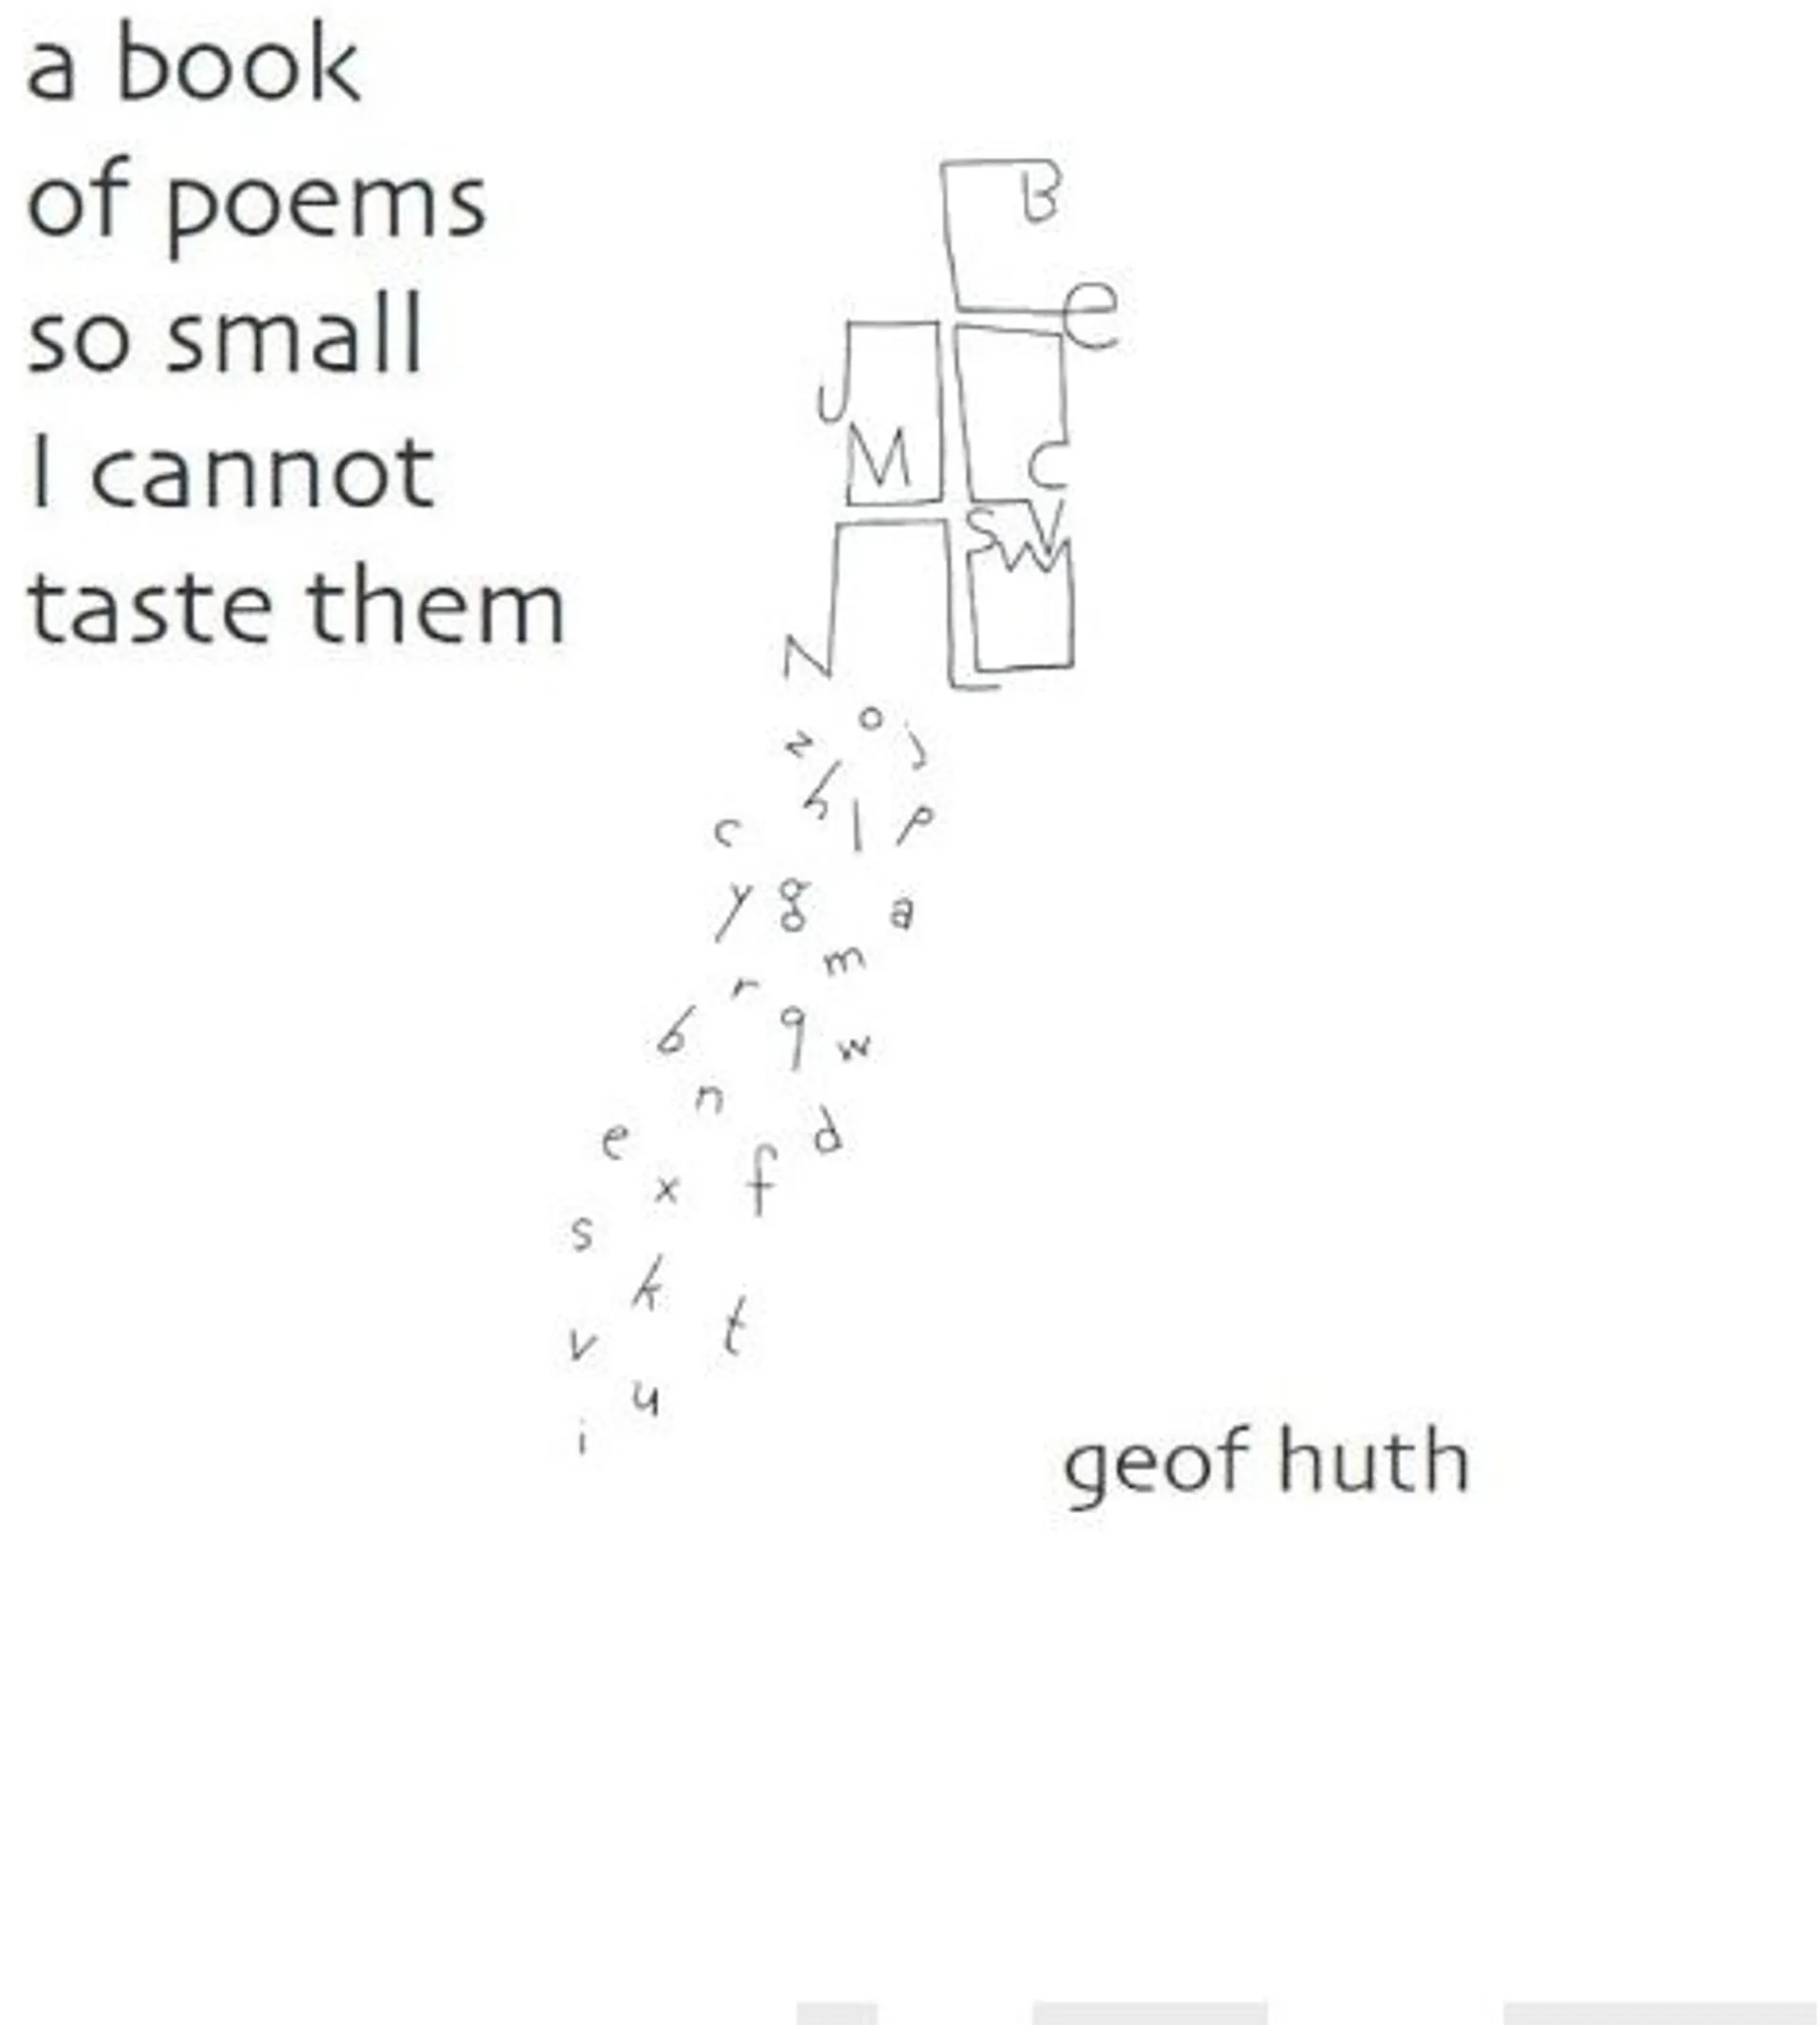 Huth, A Book of Poems so Small I Cannot Taste Them